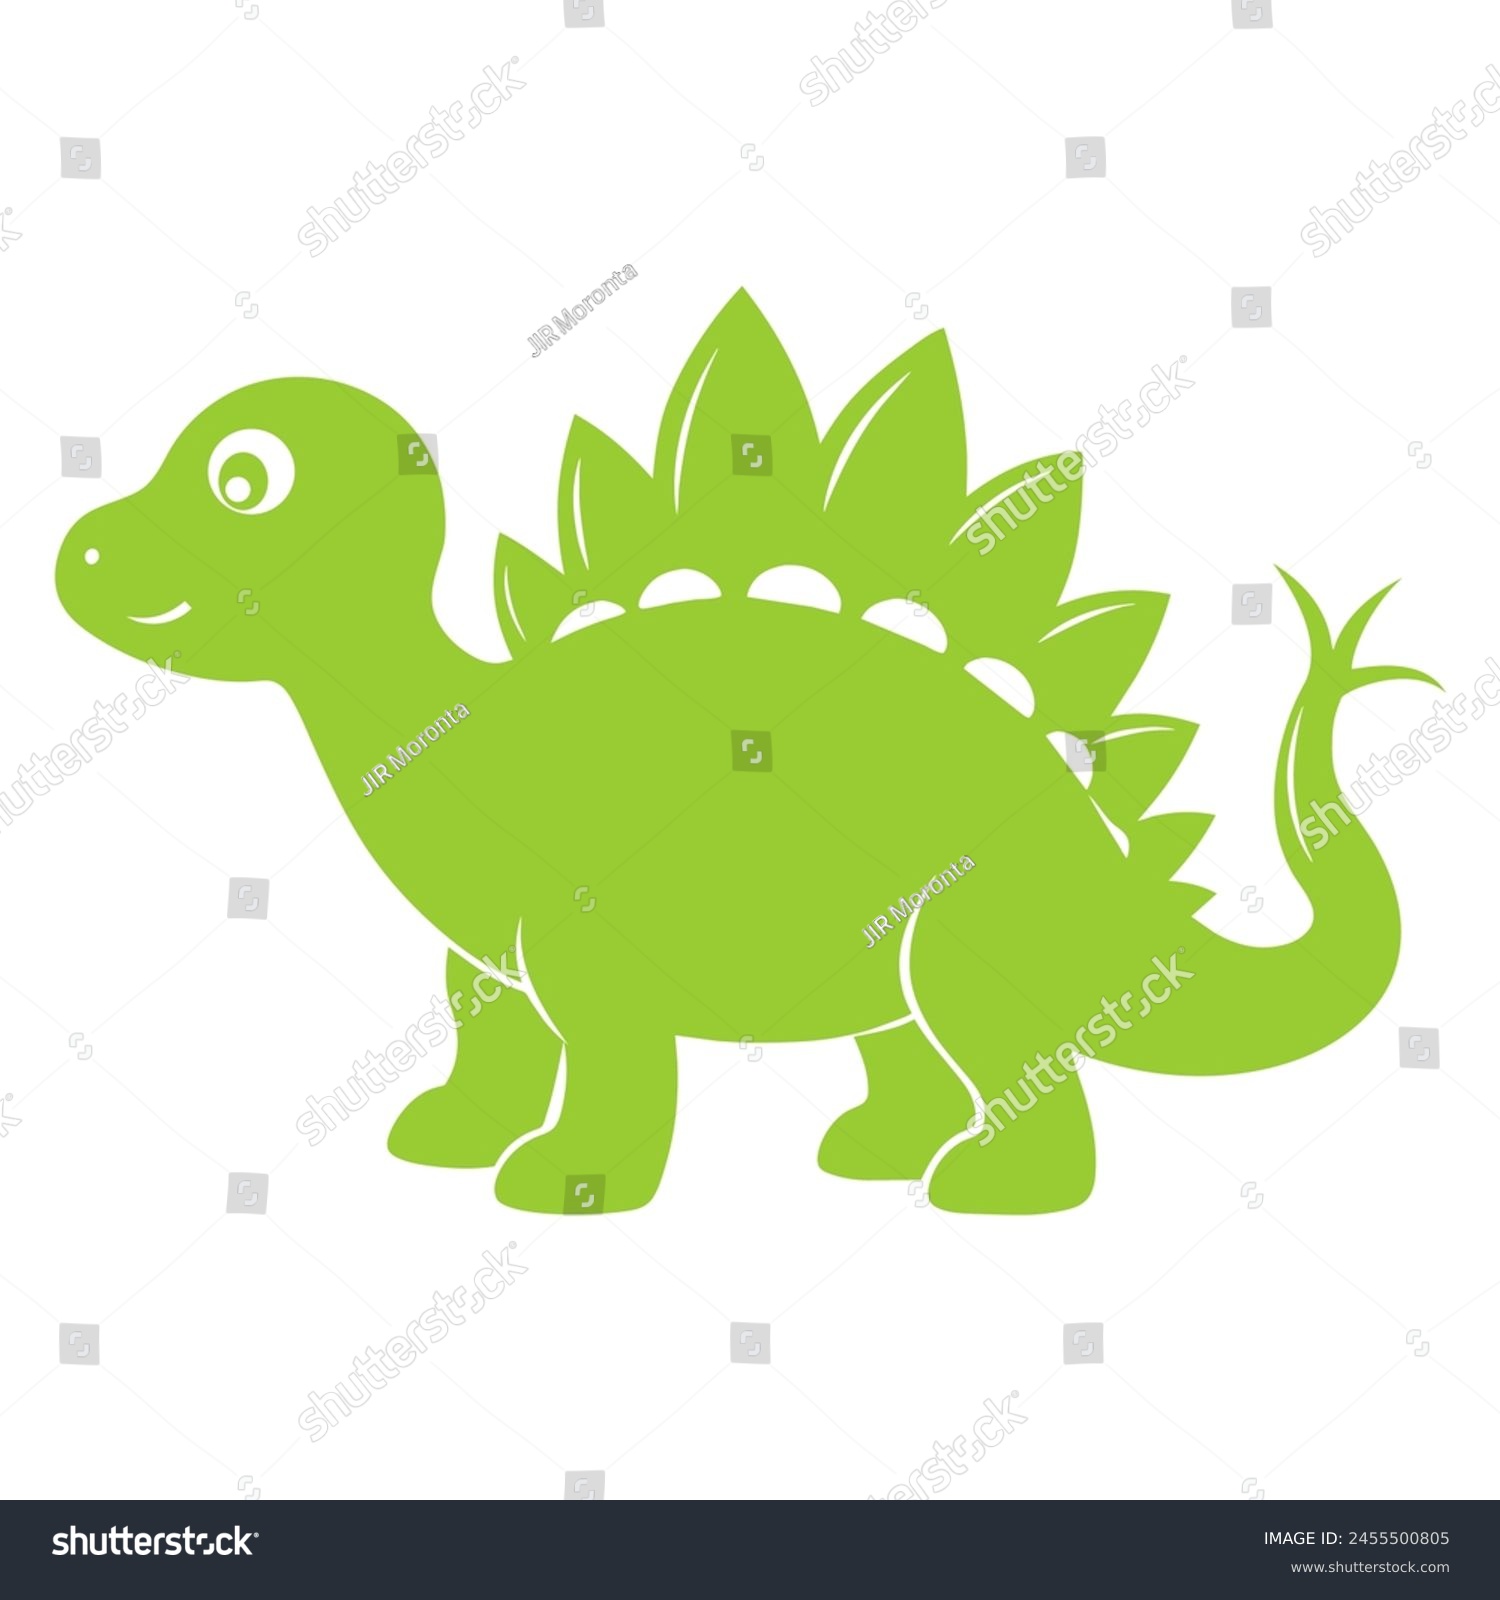 SVG of Friendly Stegosaurus silhouette in soft green, representing the peaceful herbivores of the Mesozoic era. svg